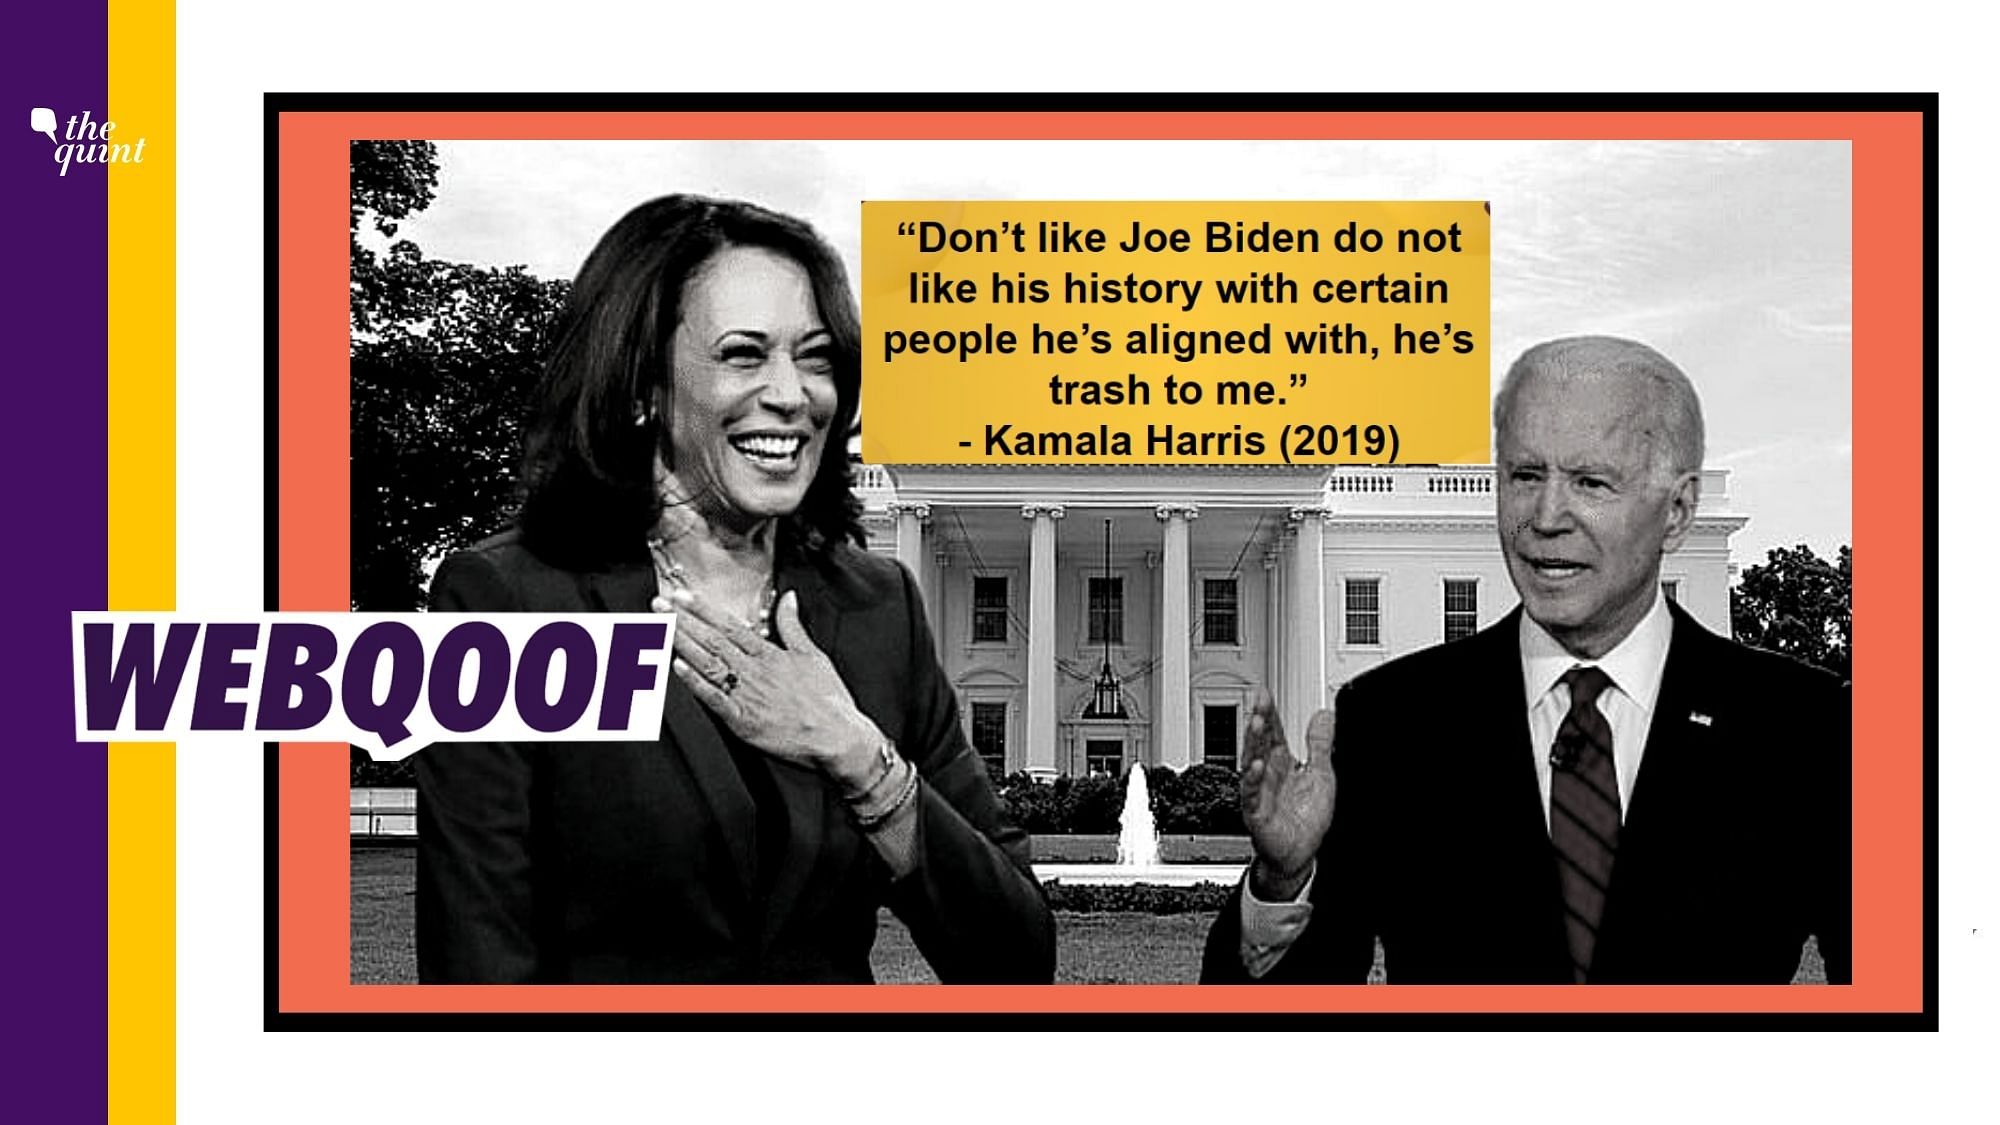 A quote lifted from a blogpost has been falsely attributed to Kamala Harris to claim that she called Joe Biden ‘trash.’